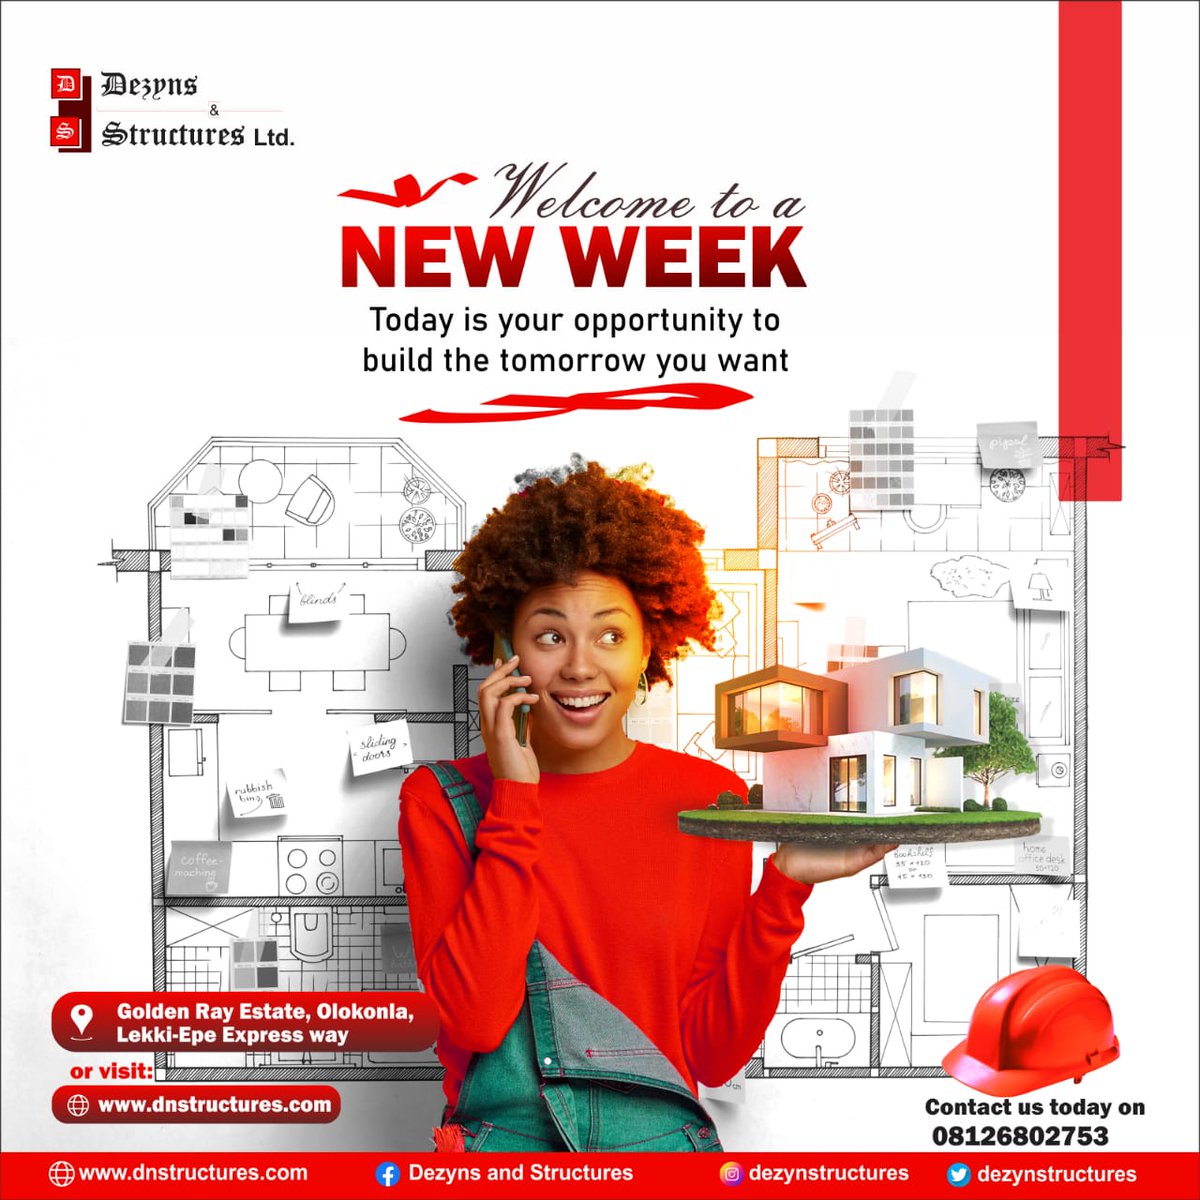 N E W 😍 W E E K❤️
.
.
Welcome to a new week. 
.
.
Today is your opportunity to build the tomorrow you want. 
.
.
#architecturerender #architecturetoday  #constructionproject  #constructionsafety #constructiondetails #constructionbusiness #lagosproperties  #nigeriaproperties